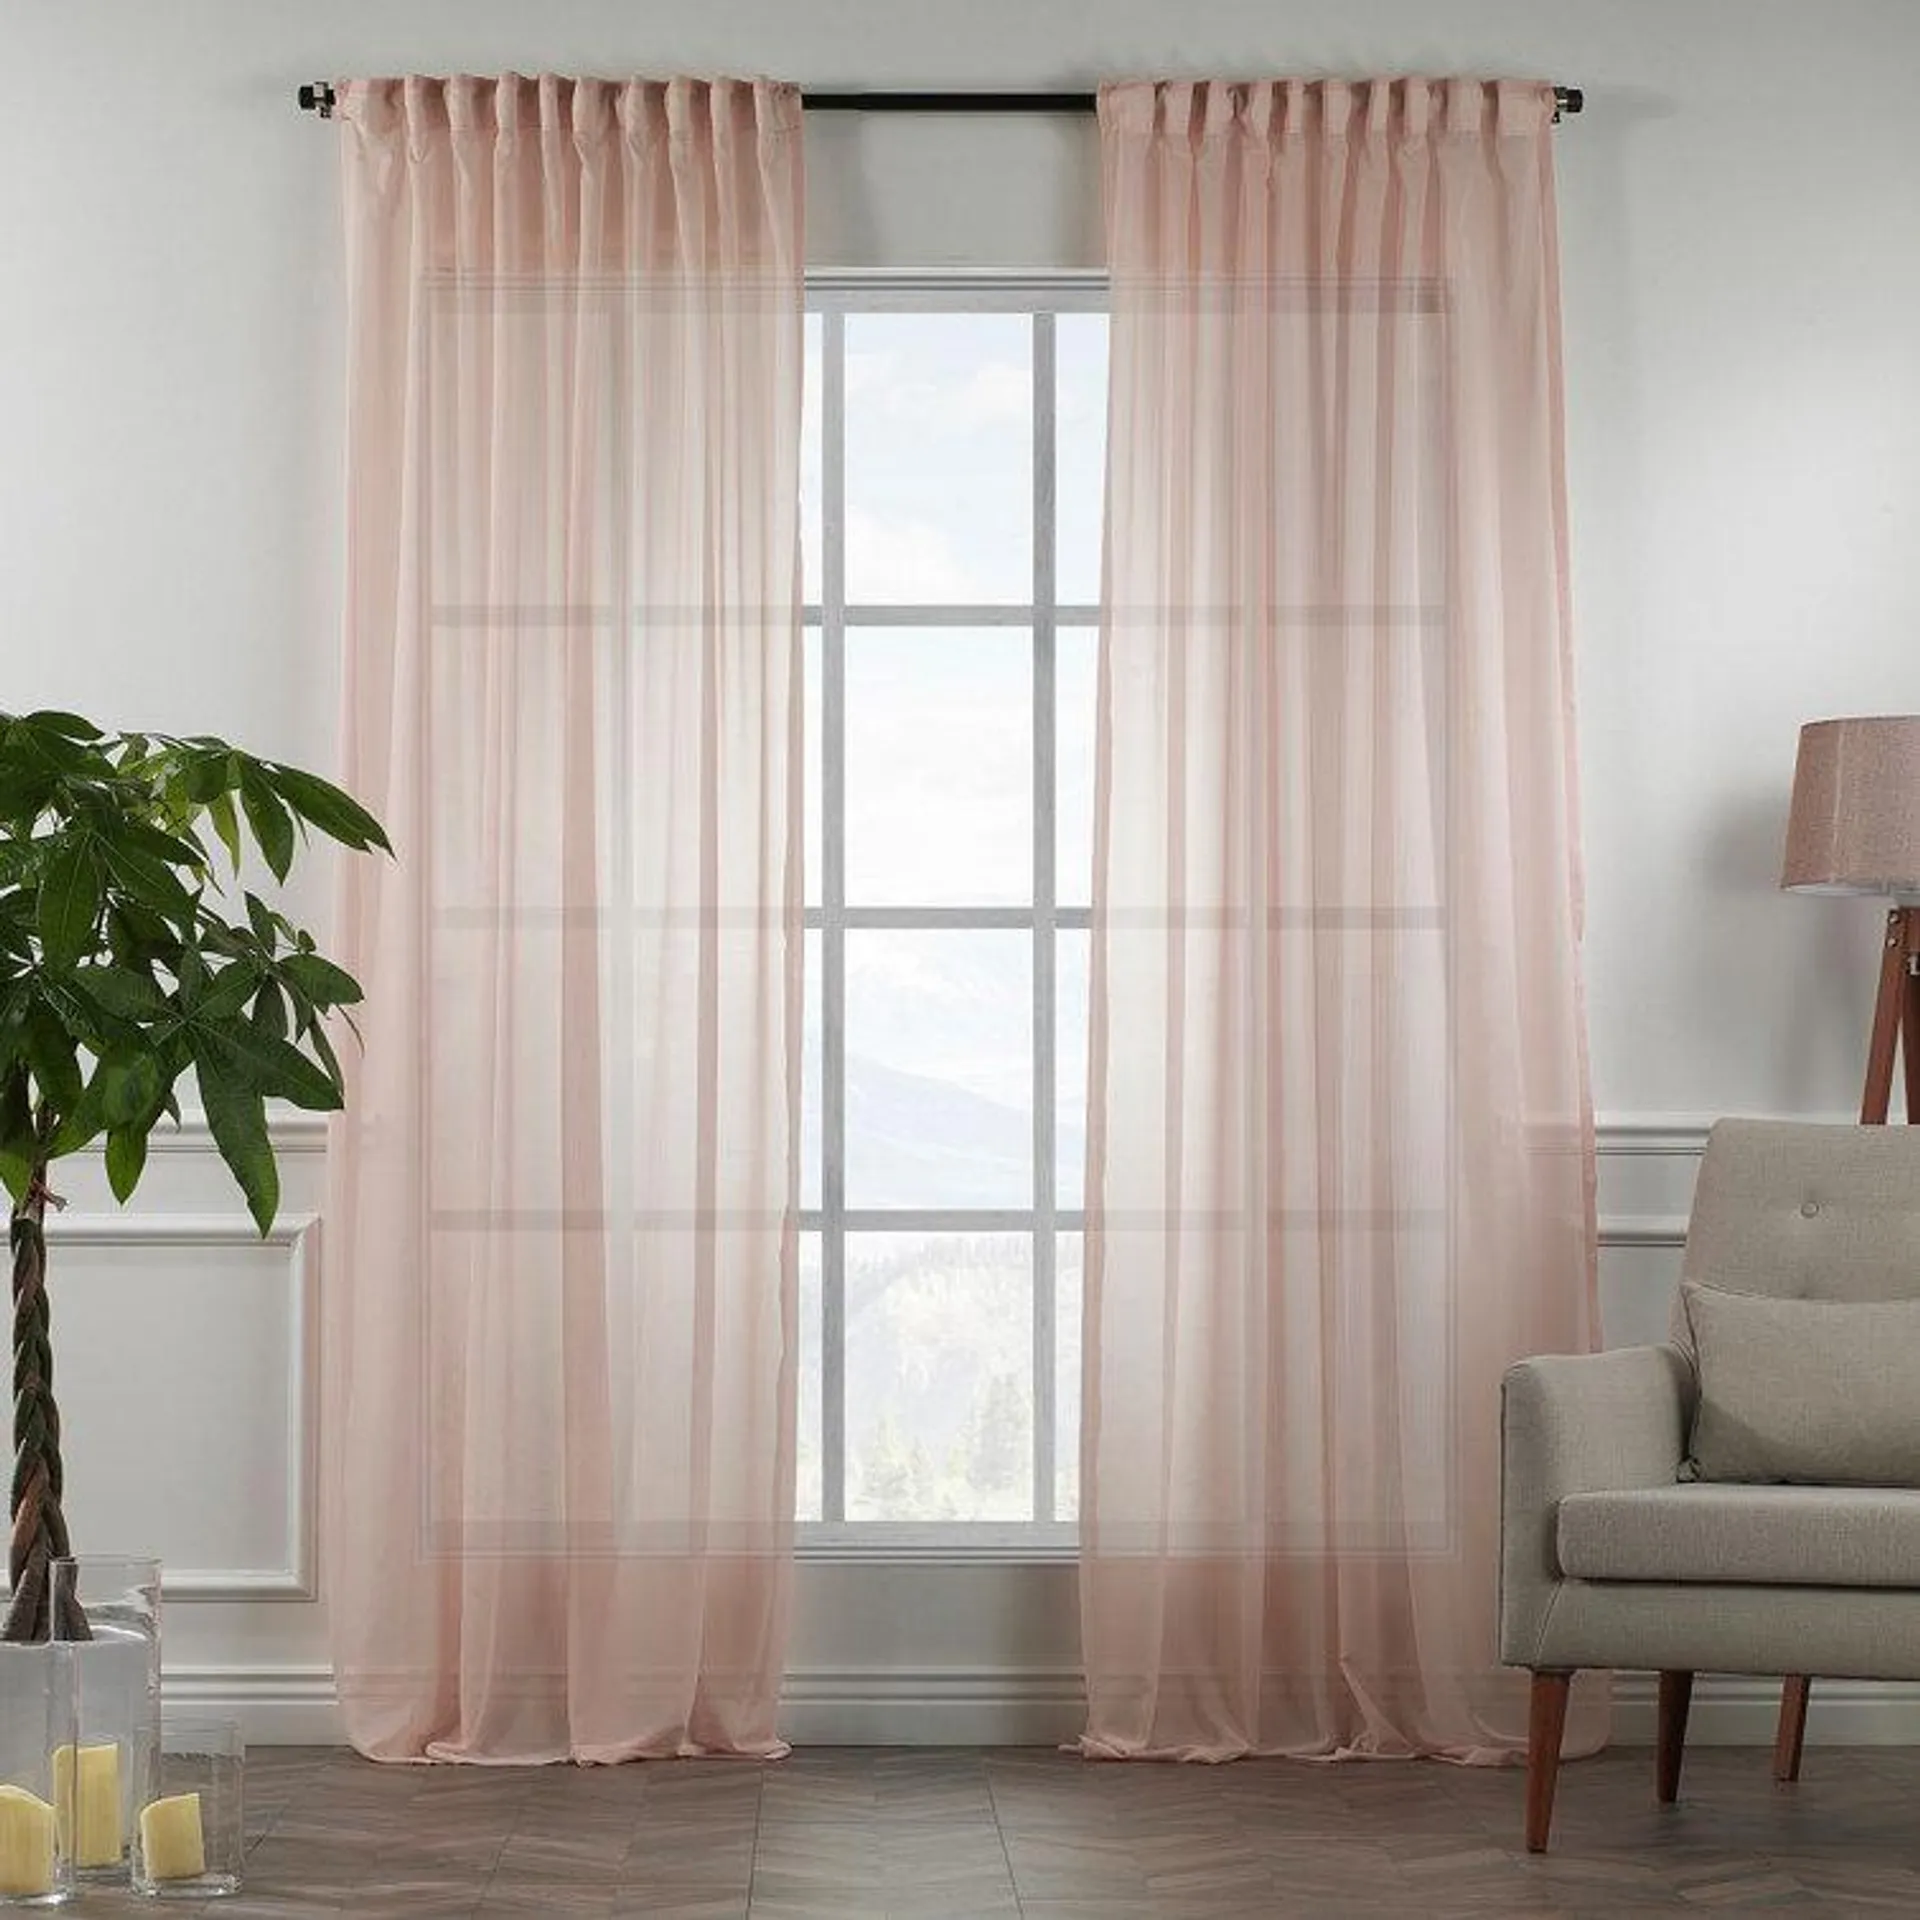 Extra Long & Extra Wide Chiffon Faux Silk Crep Curtain Panels (Set of 2)